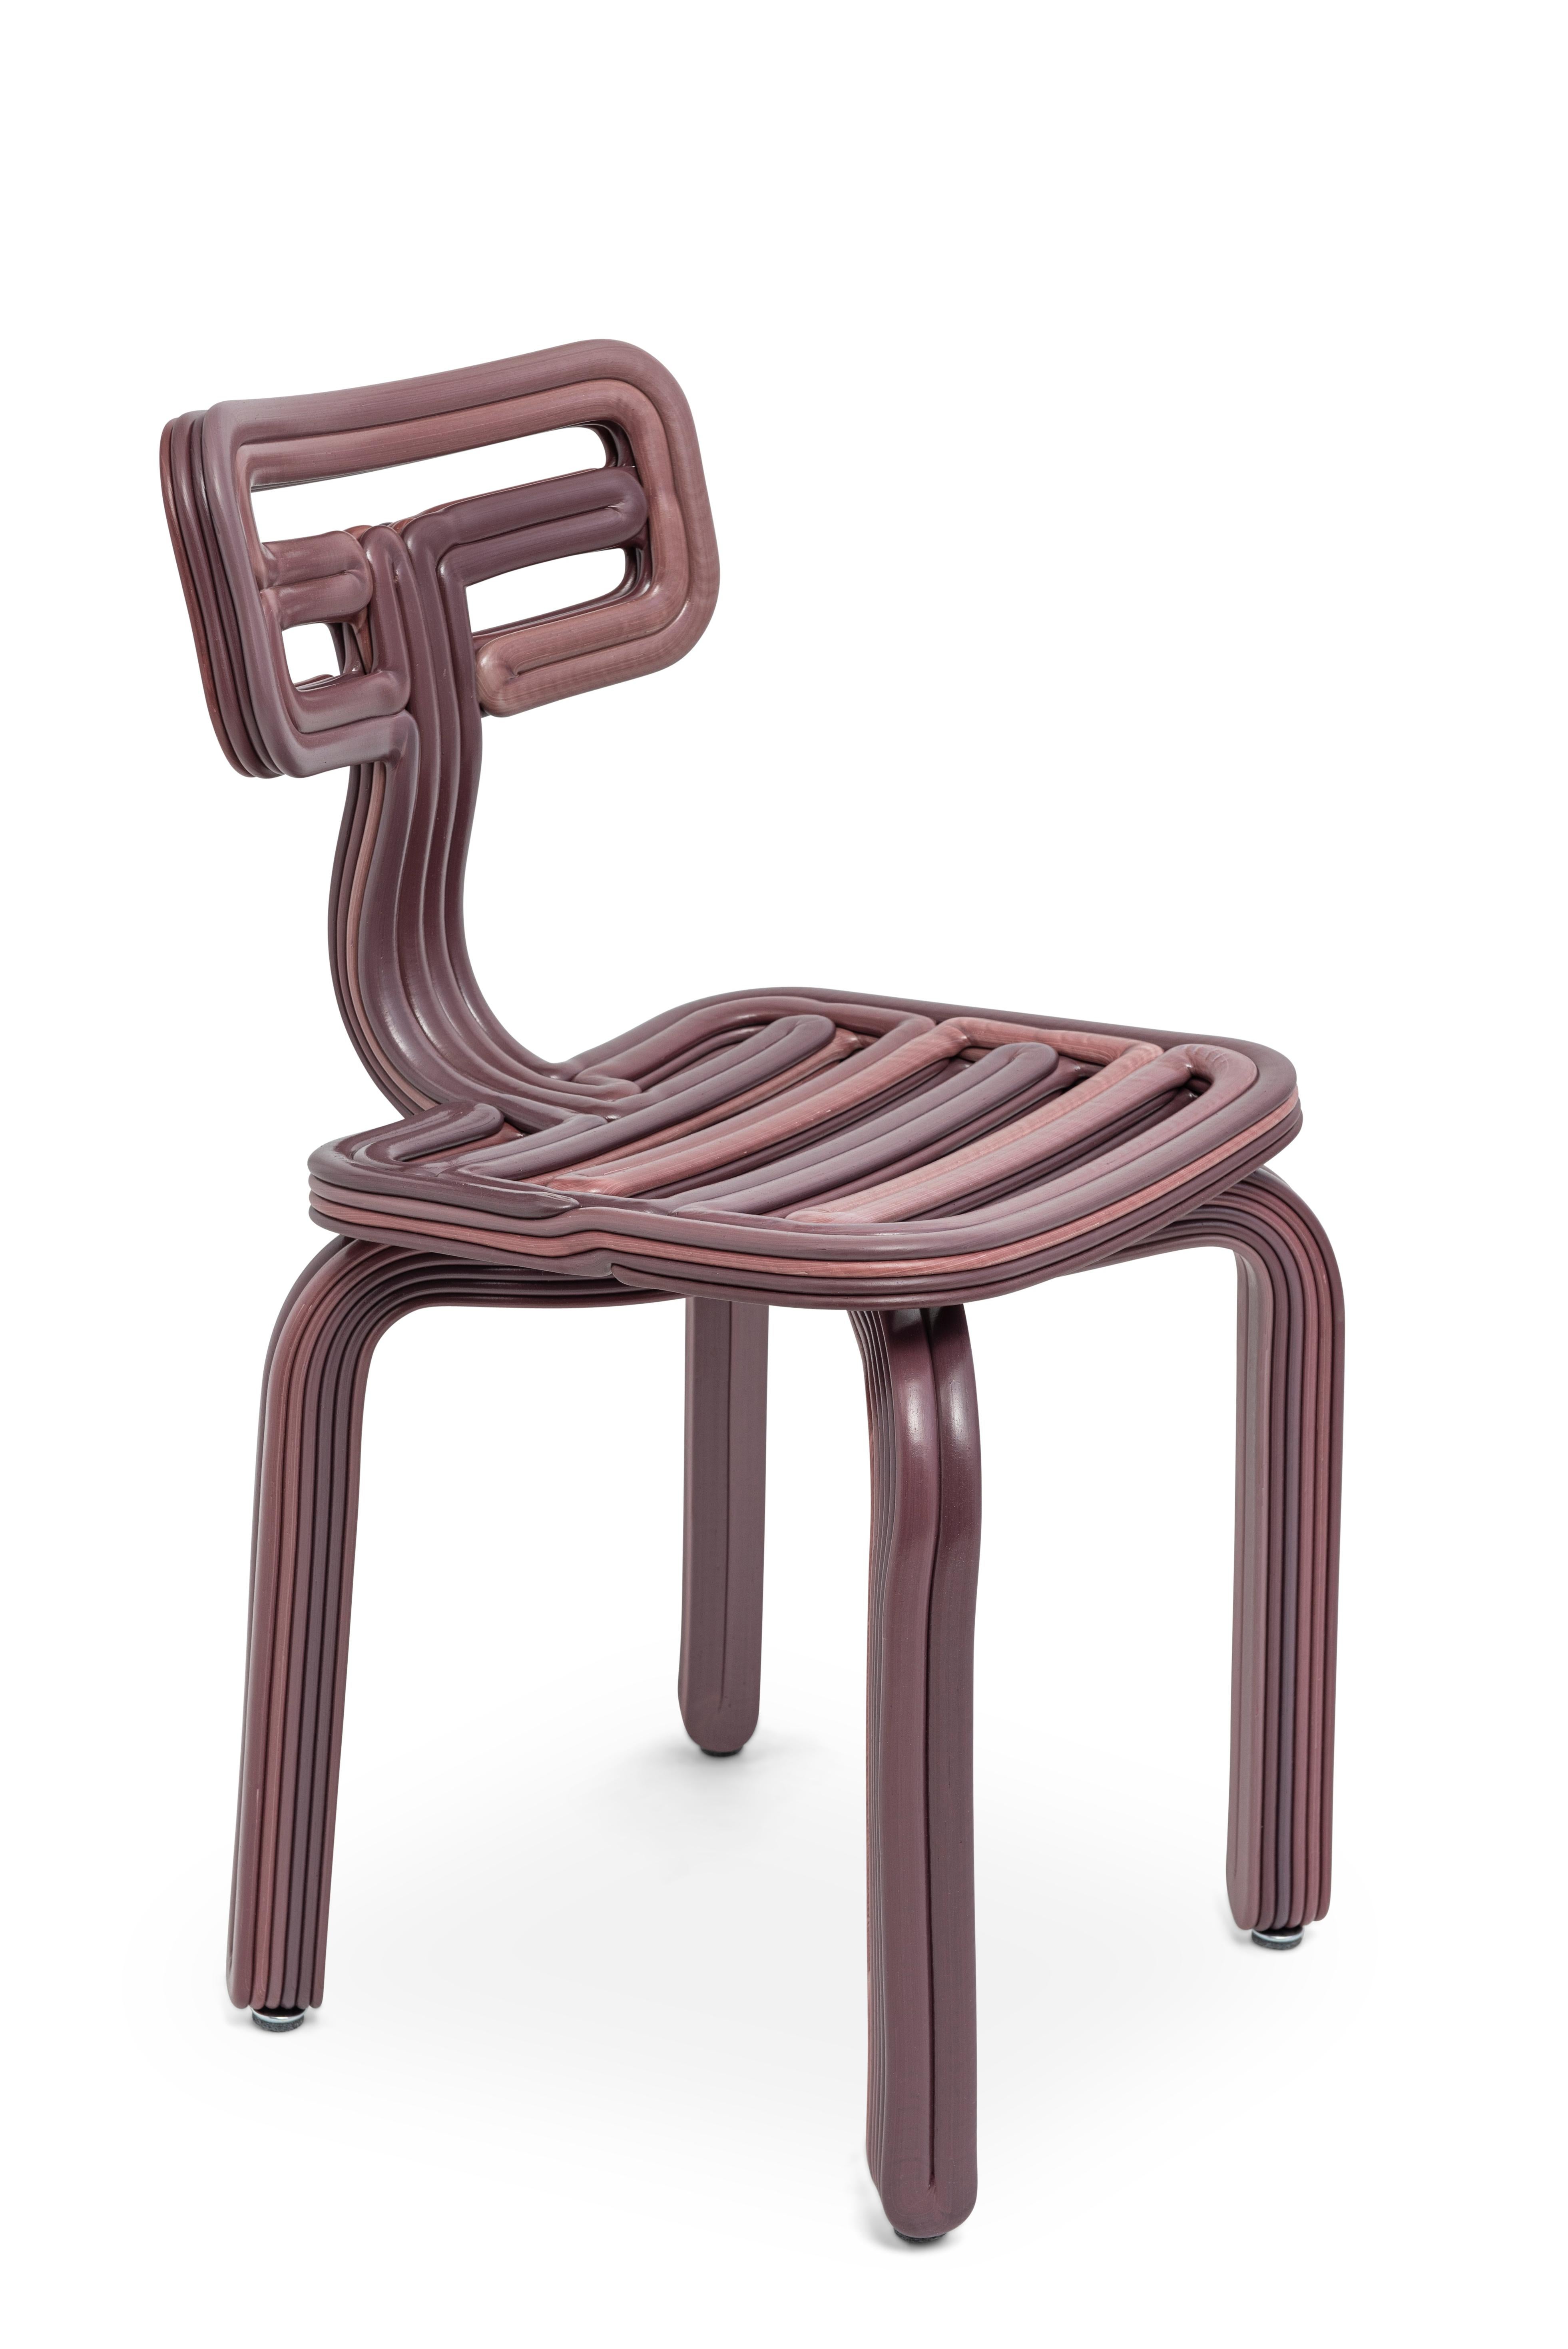 Contemporary Chubby Chair in Port 3D Printed Recycled Plastic